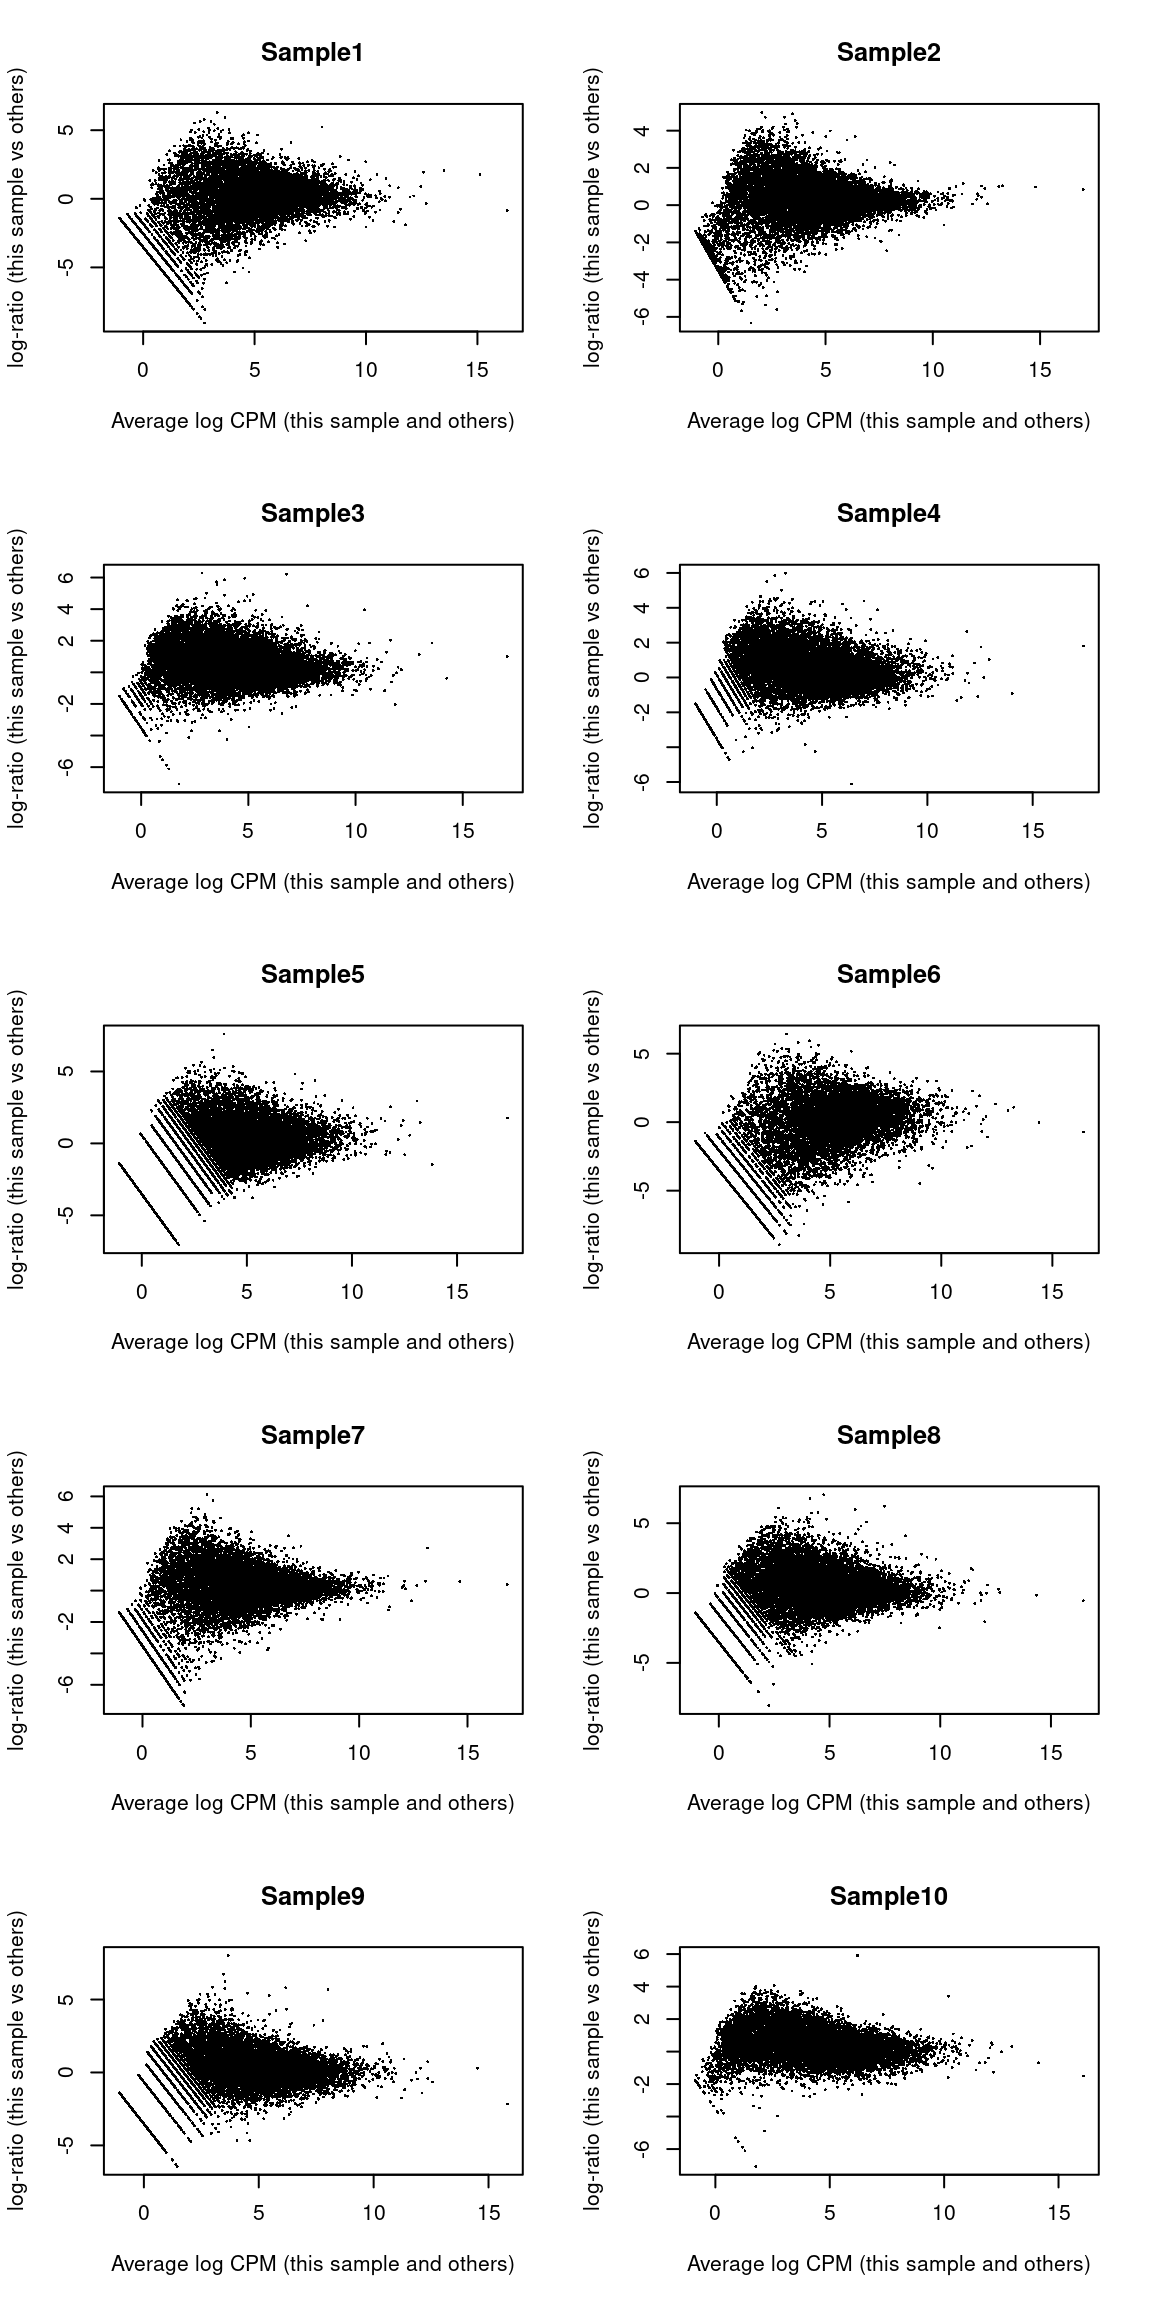 MA plots for the beta cell pseudo-bulk profiles. Each MA plot is generated by comparing the corresponding pseudo-bulk profile against the average of all other profiles